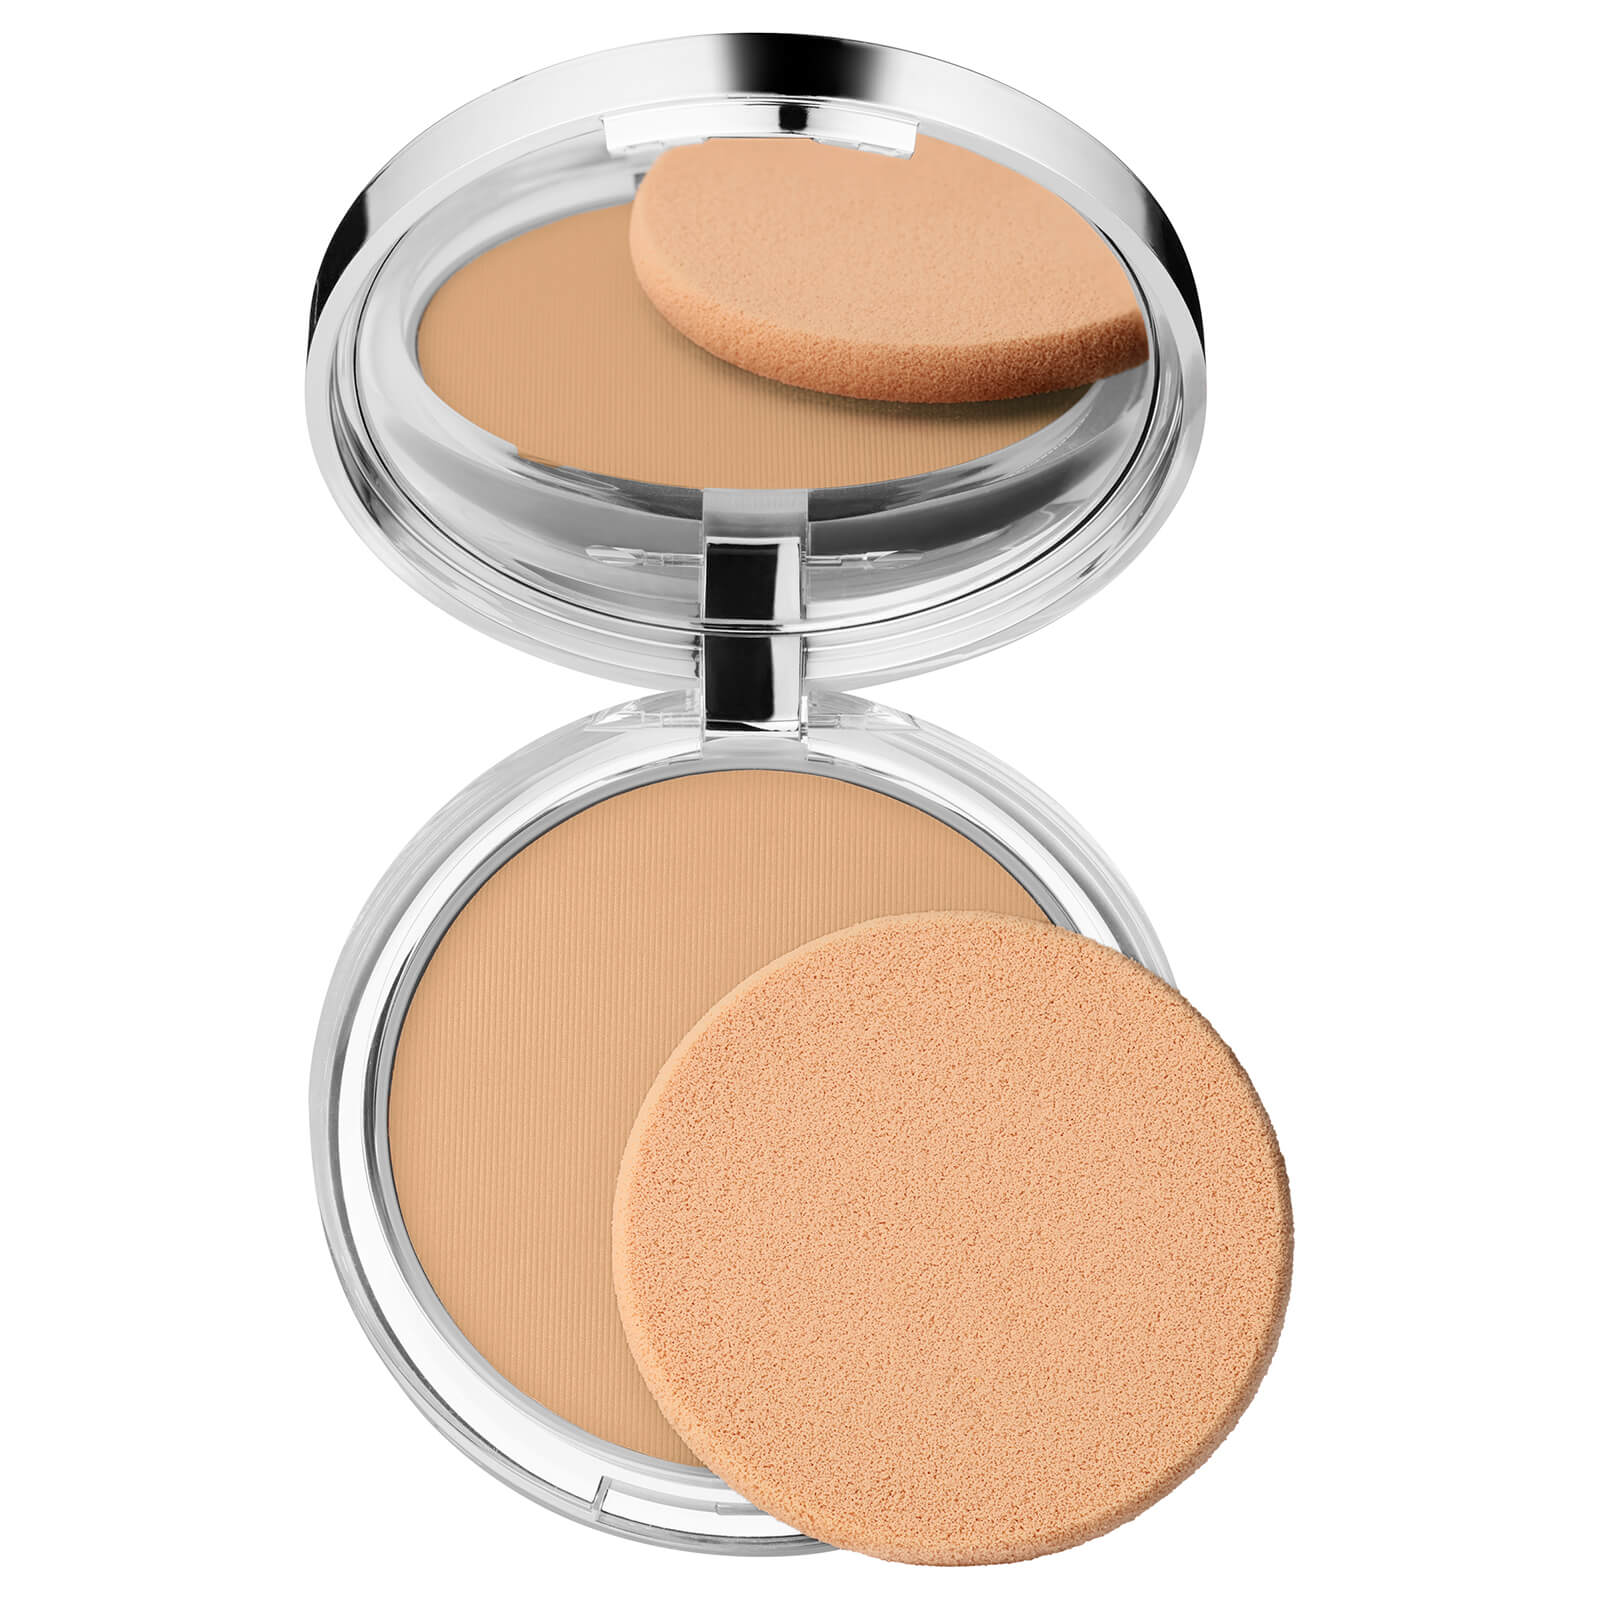 Clinique Stay-Matte Sheer Pressed Powder Oil-Free 7.6g (Various Shades) - Stay Honey